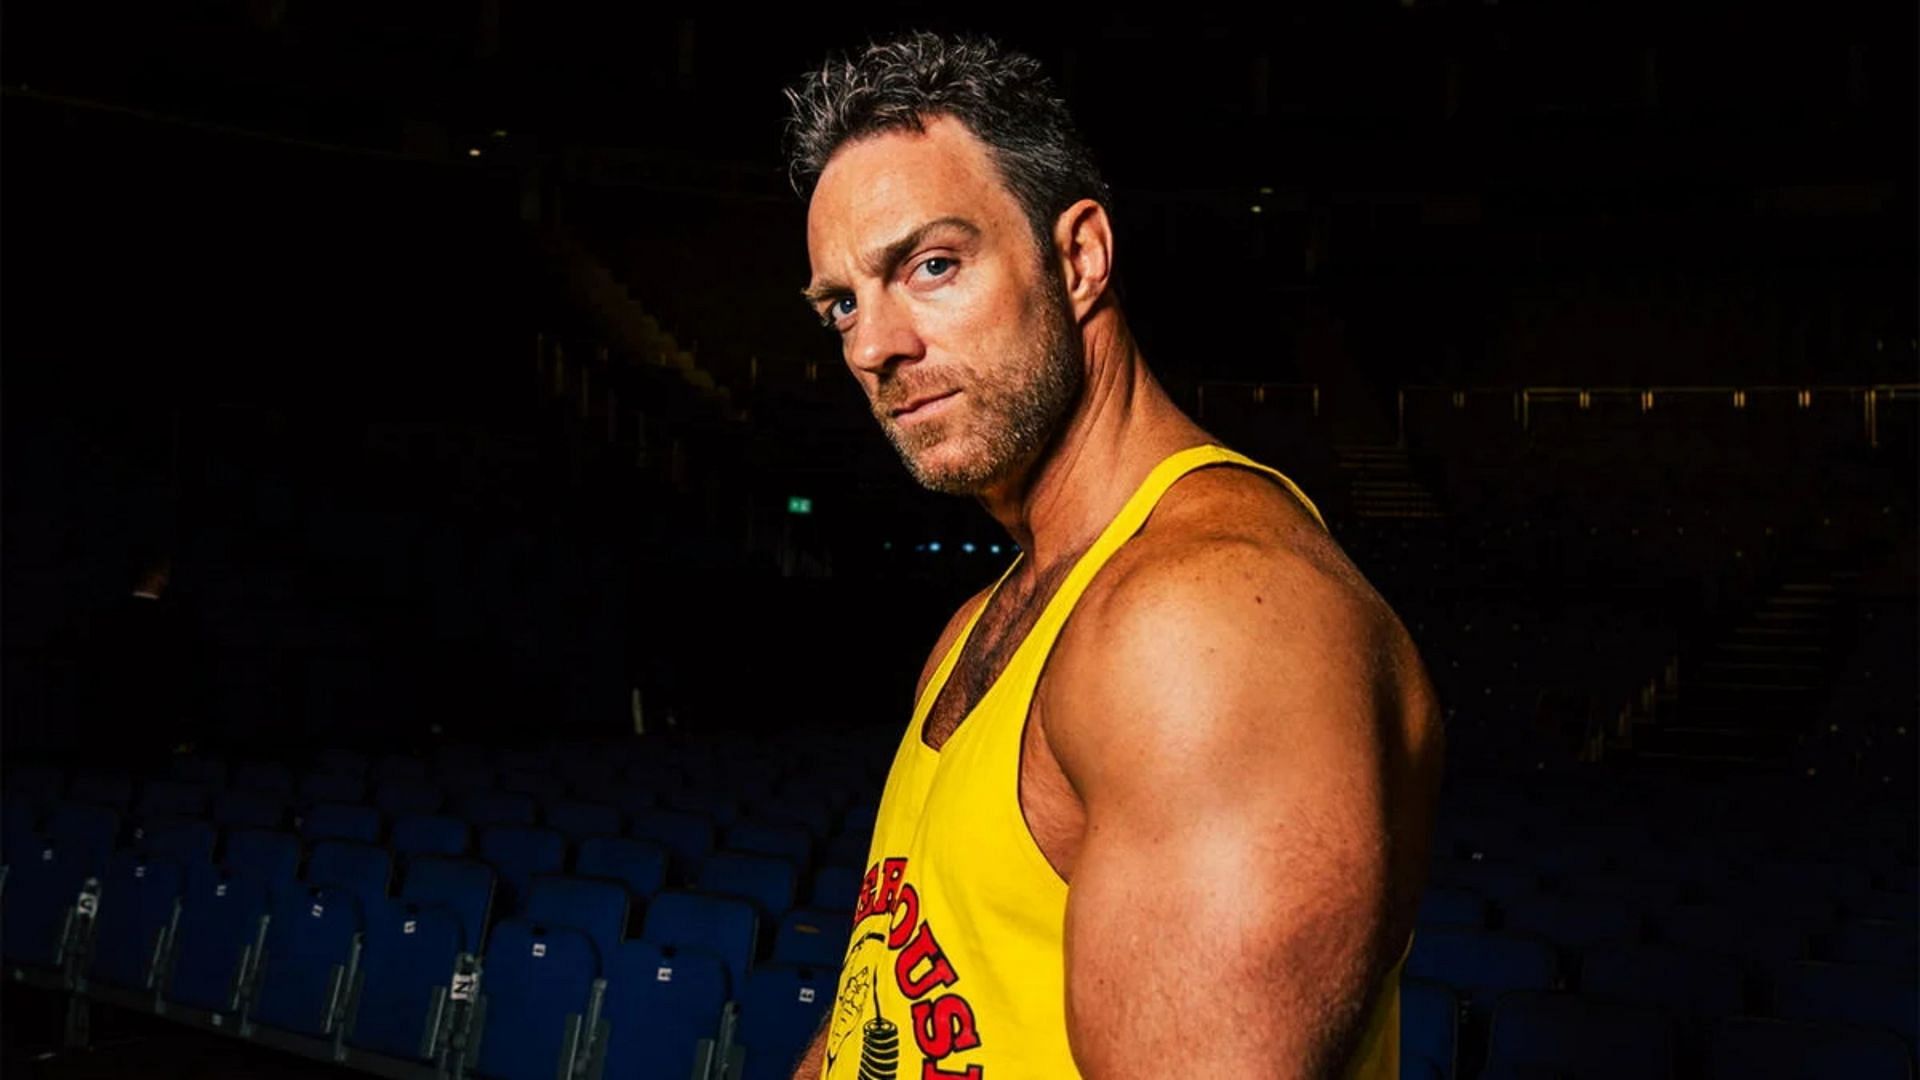 LA Knight is the former leader of Maximum Male Models in WWE